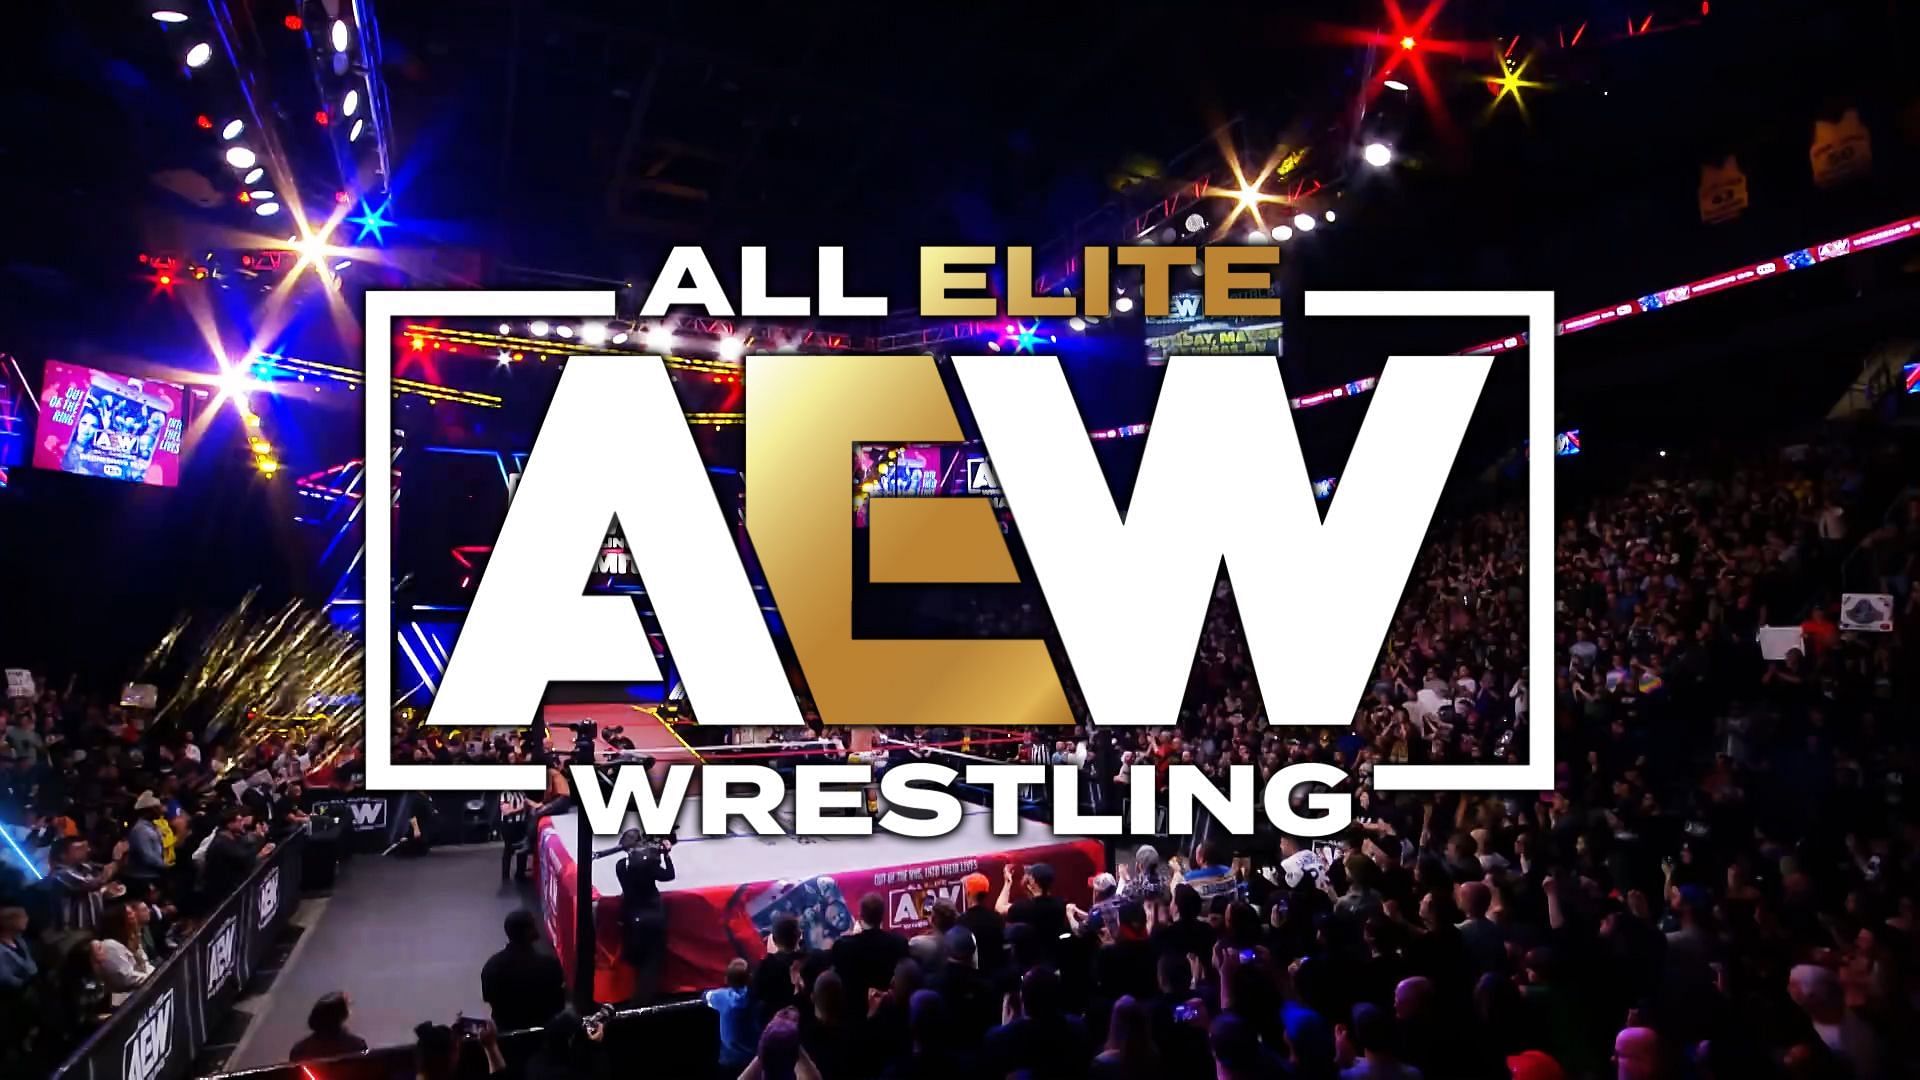 All Elite Wrestling was founded in January 2019